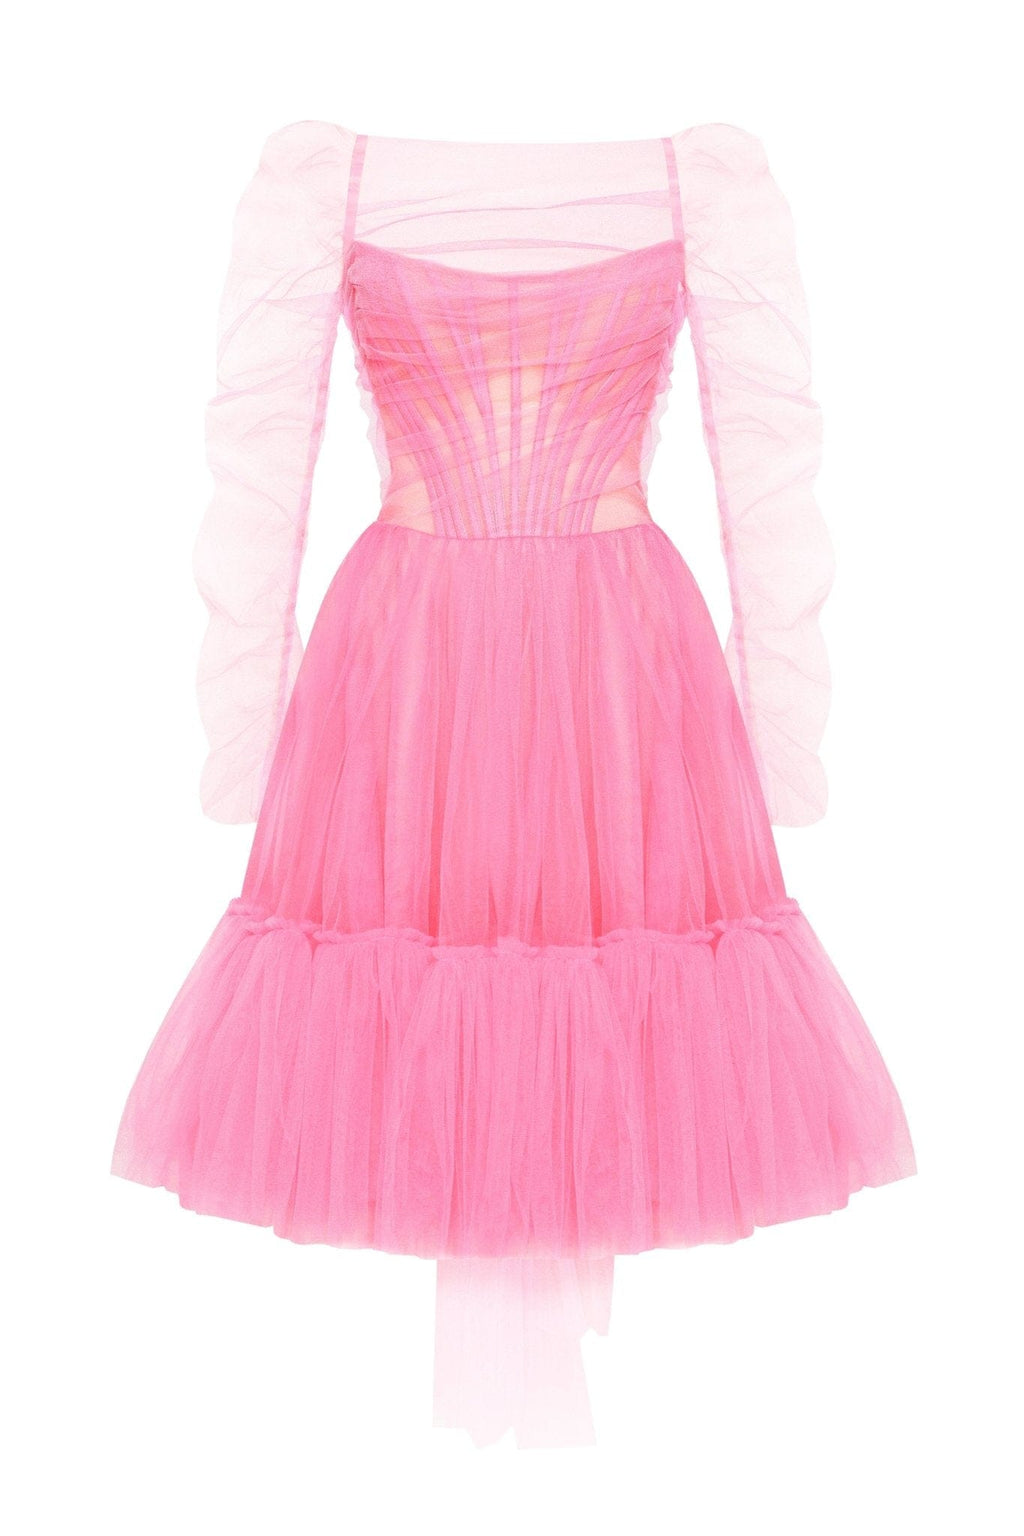 Products ➤ Milla Dresses - USA, Worldwide delivery